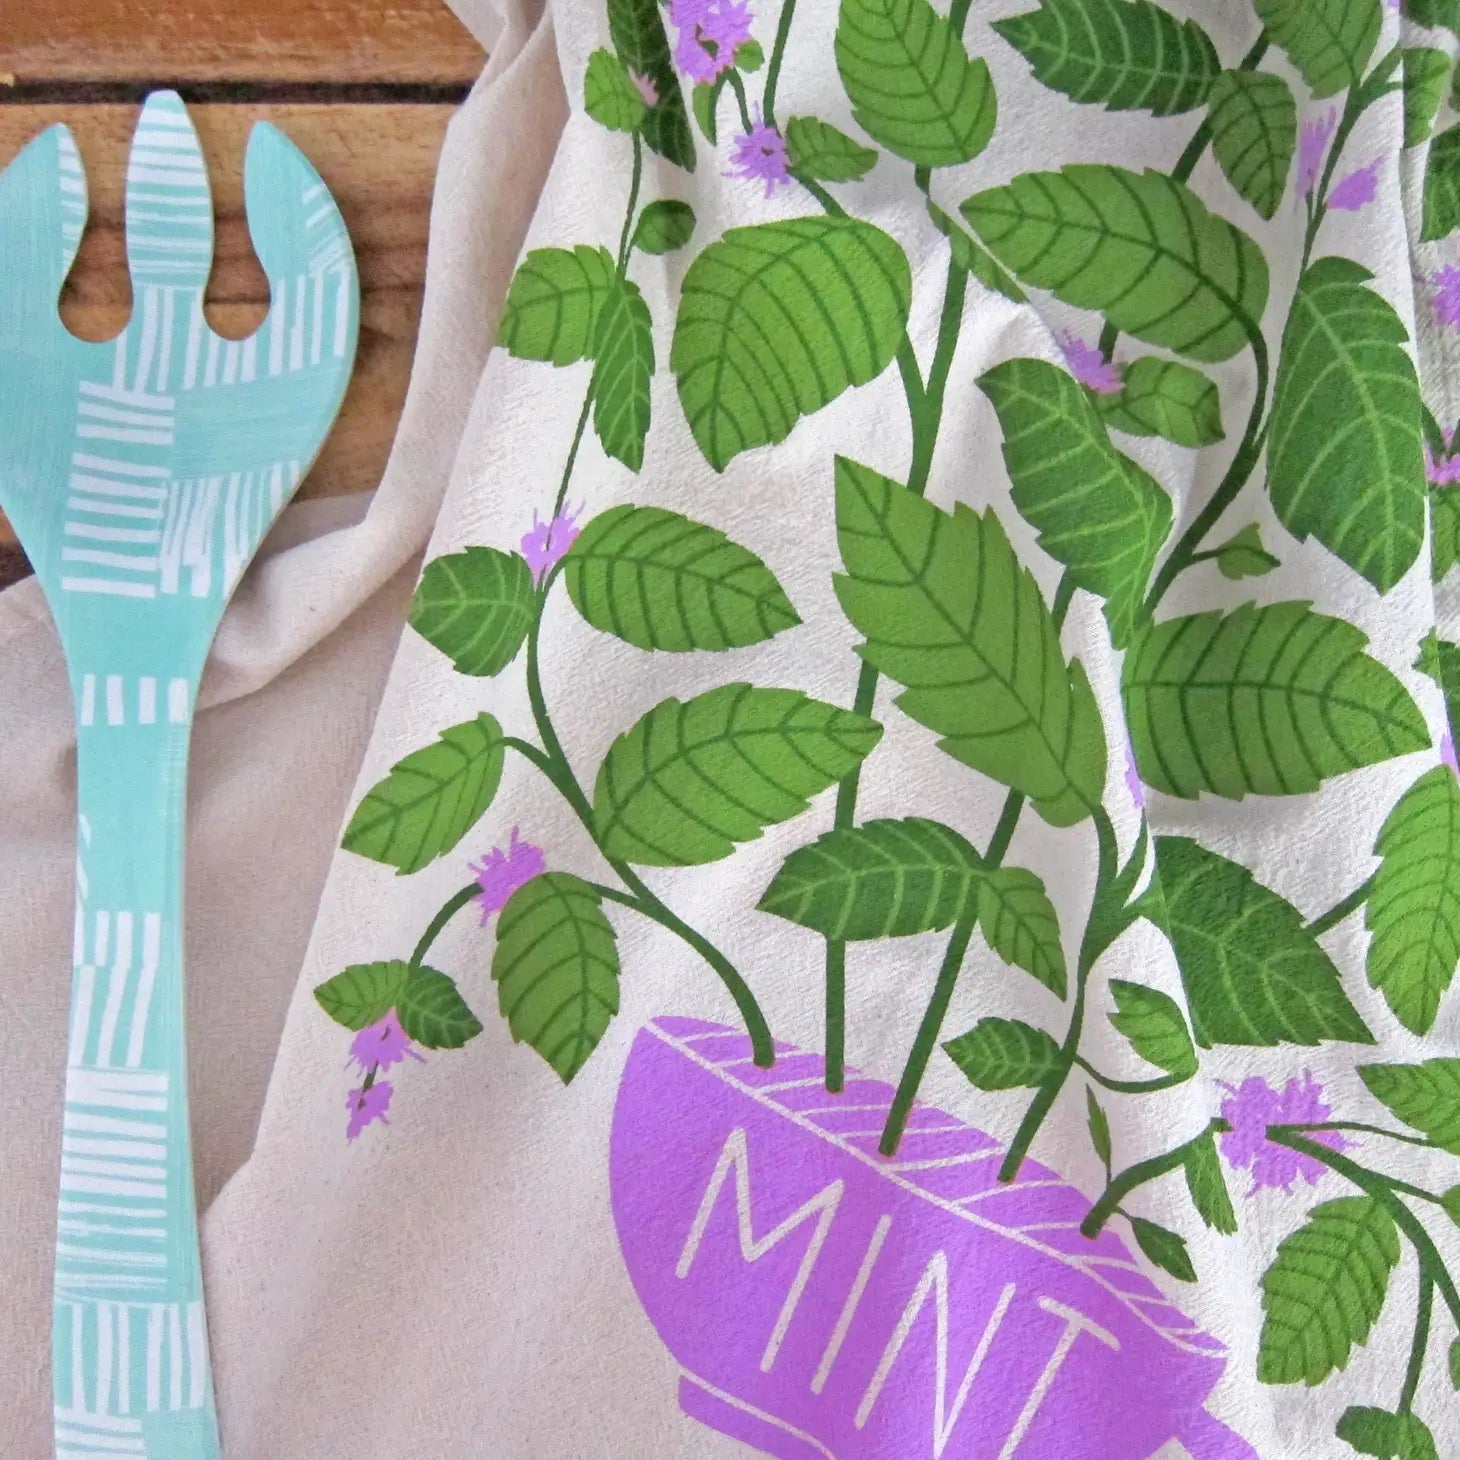 This dish towel gift sets are packaged up ready for gifting! The I Lilac Purple set contains 2 100% cotton, unbleached kitchen towels: Lilac & Mint